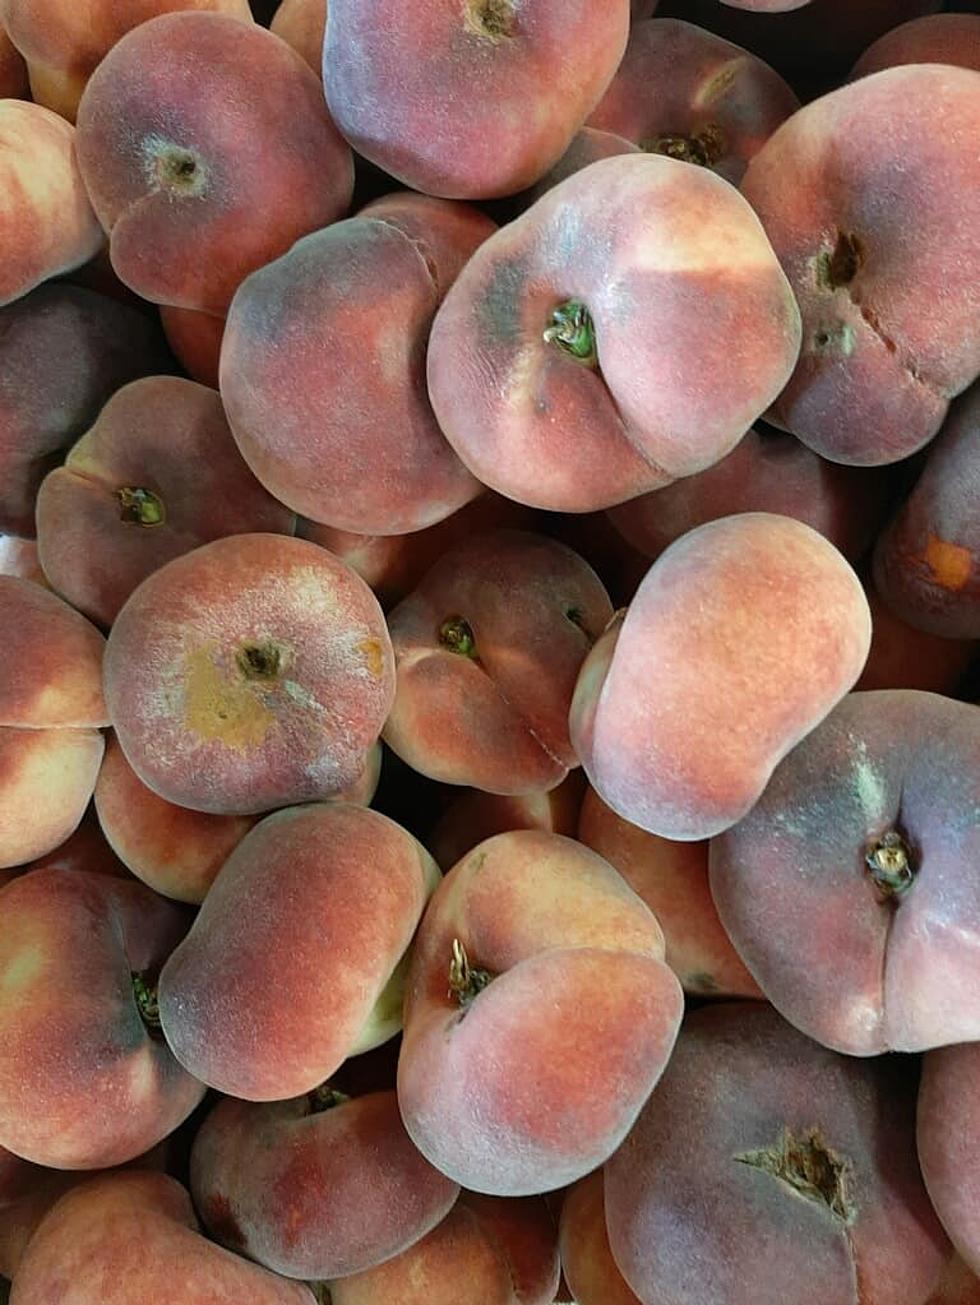 Utica/Rome ‘Donut Peaches’ are Juicy and Candy Sweet